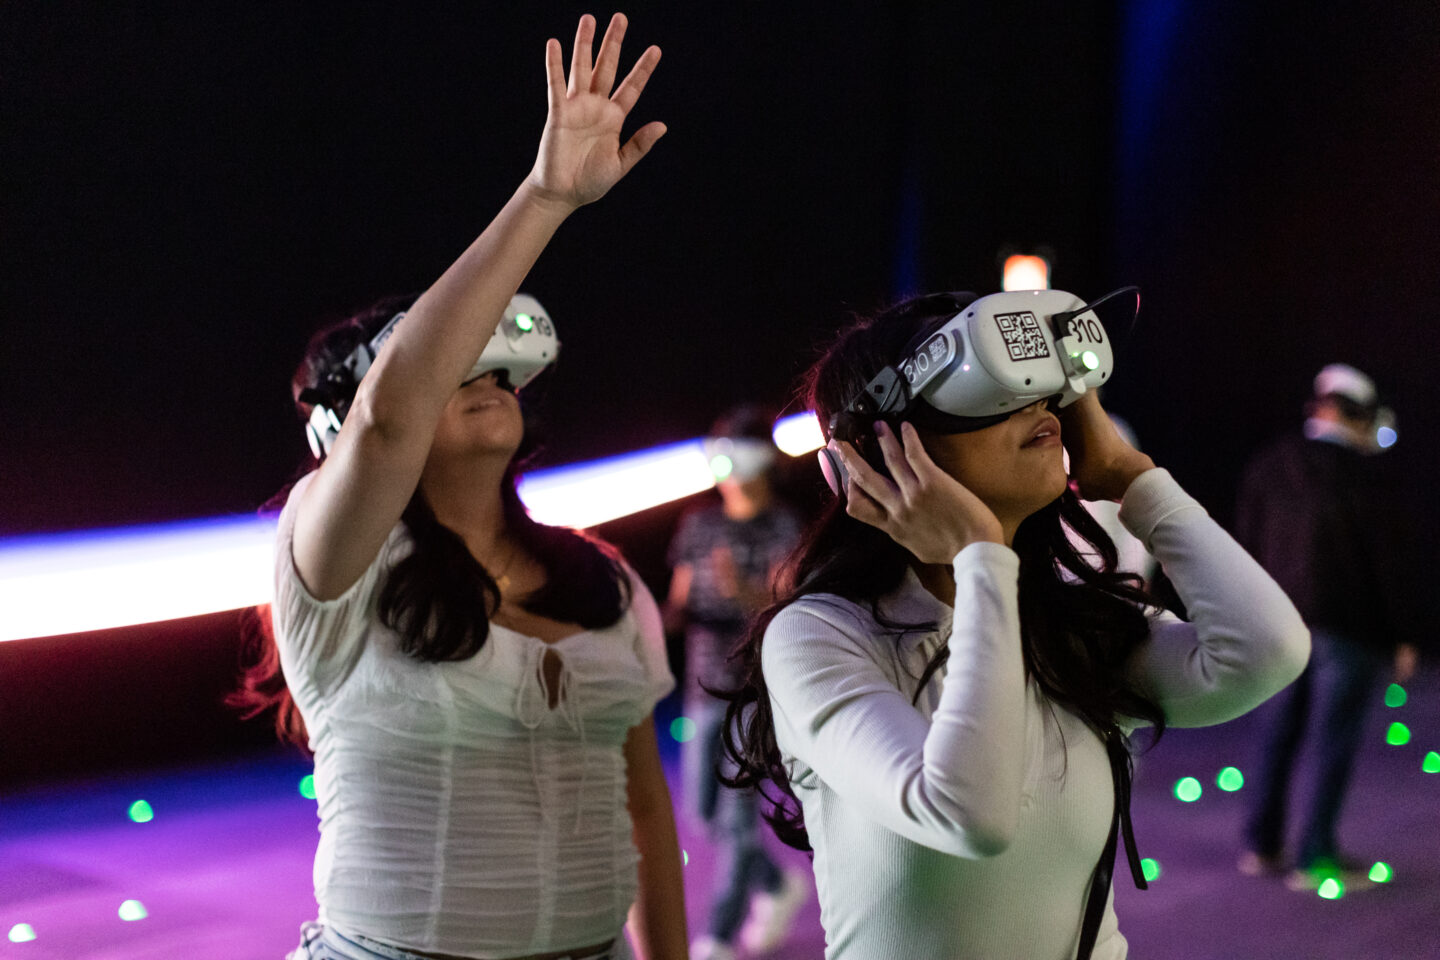 Guests experiencing THE INFINITE virtual experience